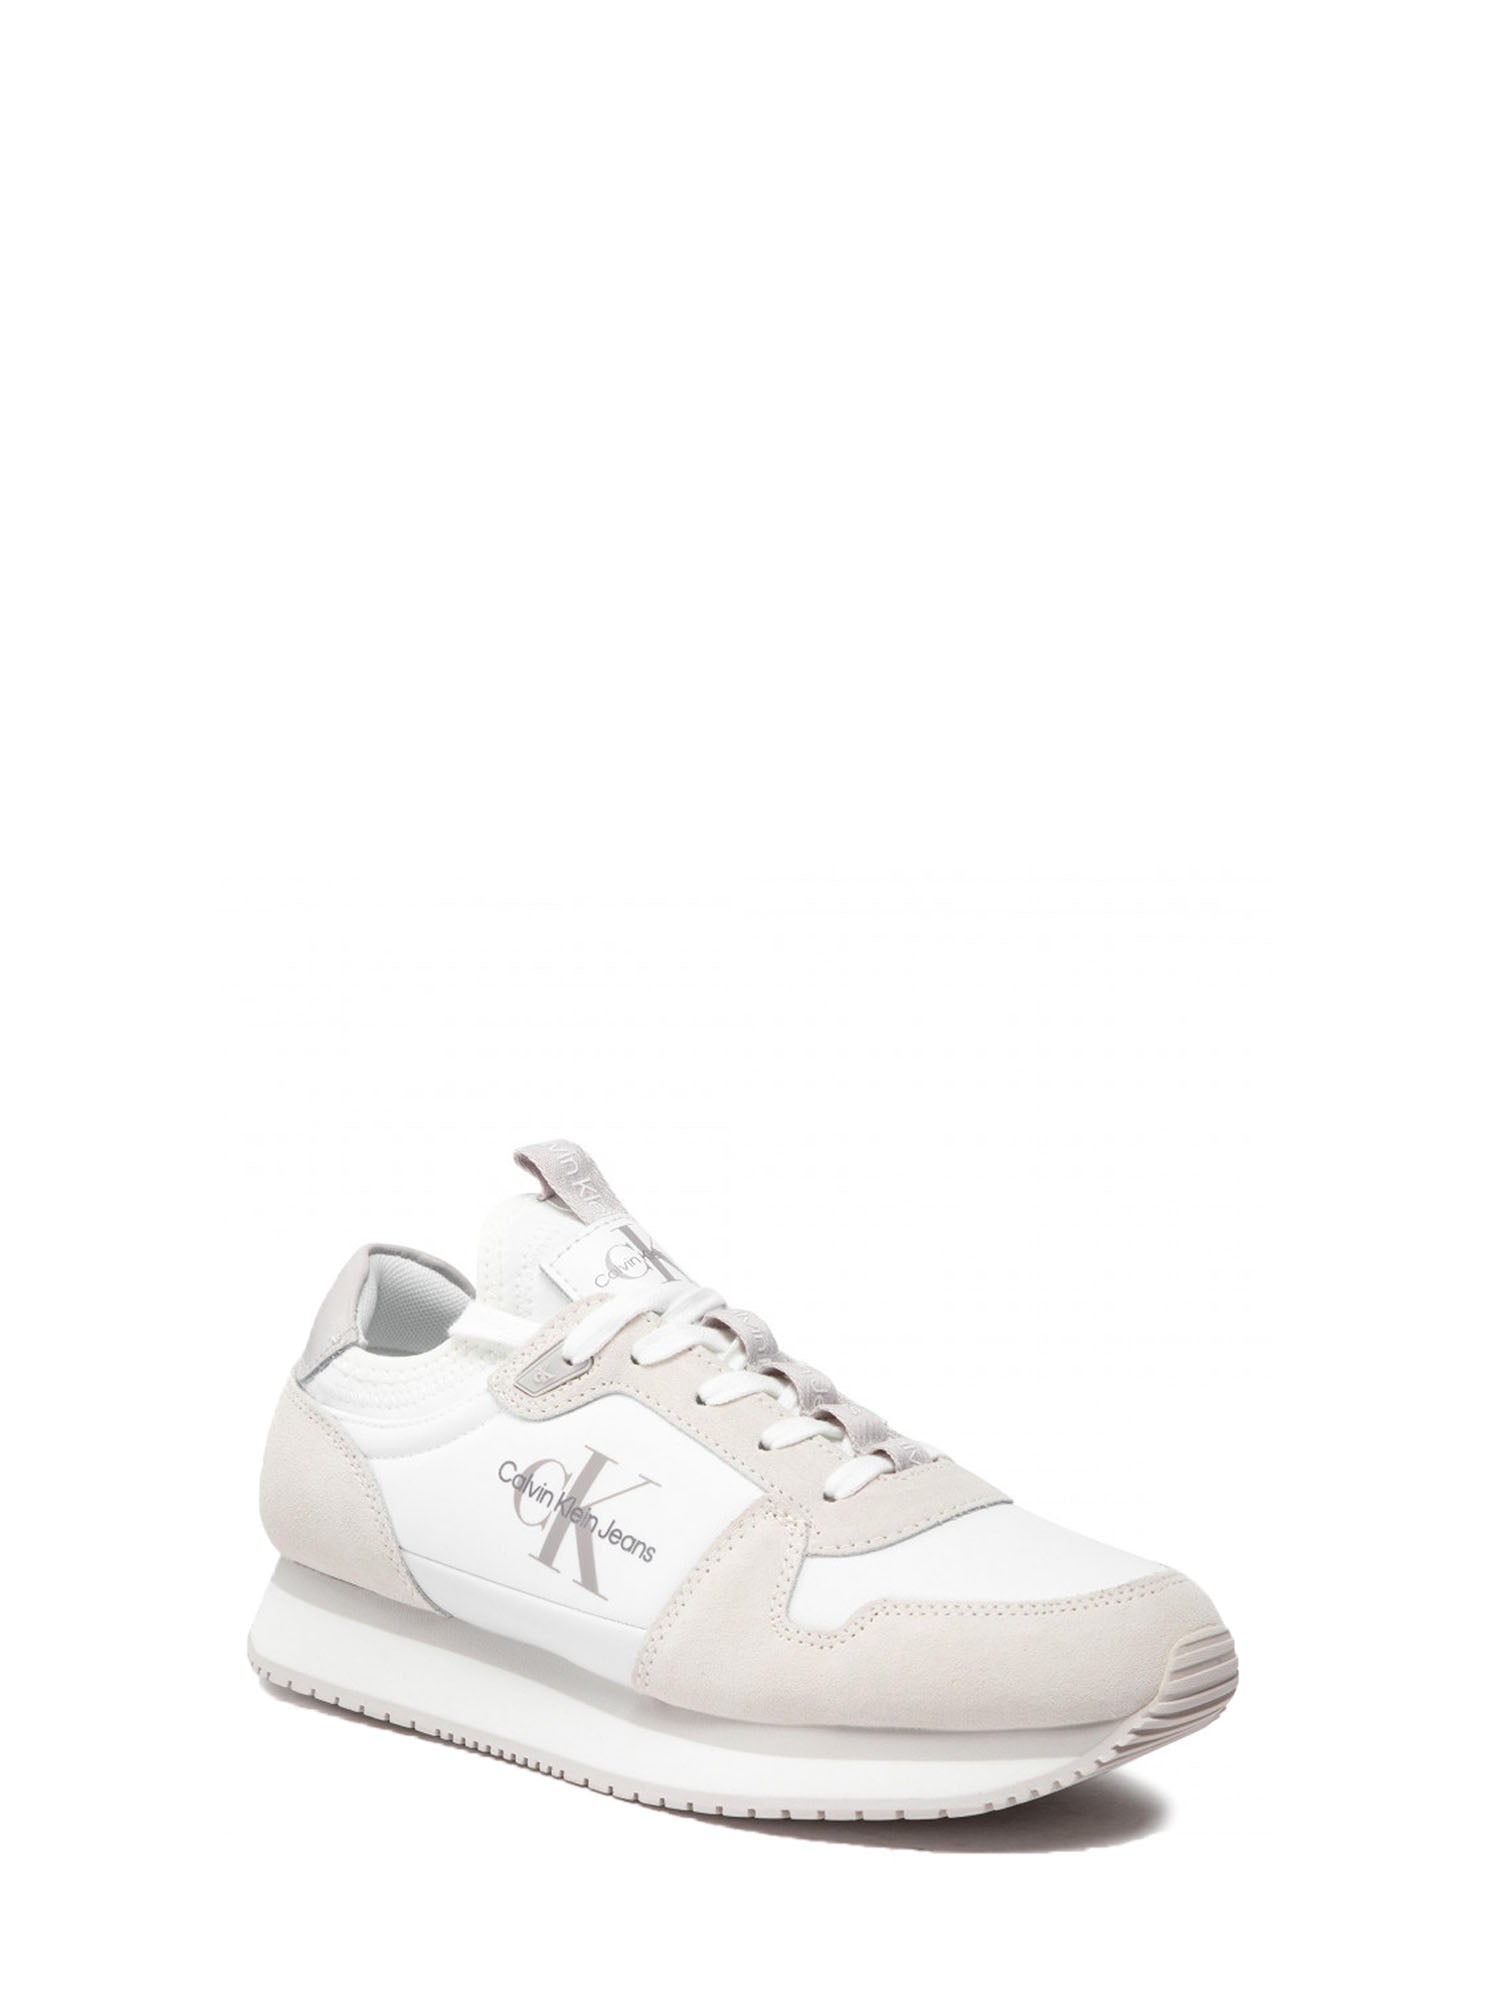 CALVIN KLEIN SHOES SNEAKERS RUNNER SOCK LACEUP NY-LTH BIANCO